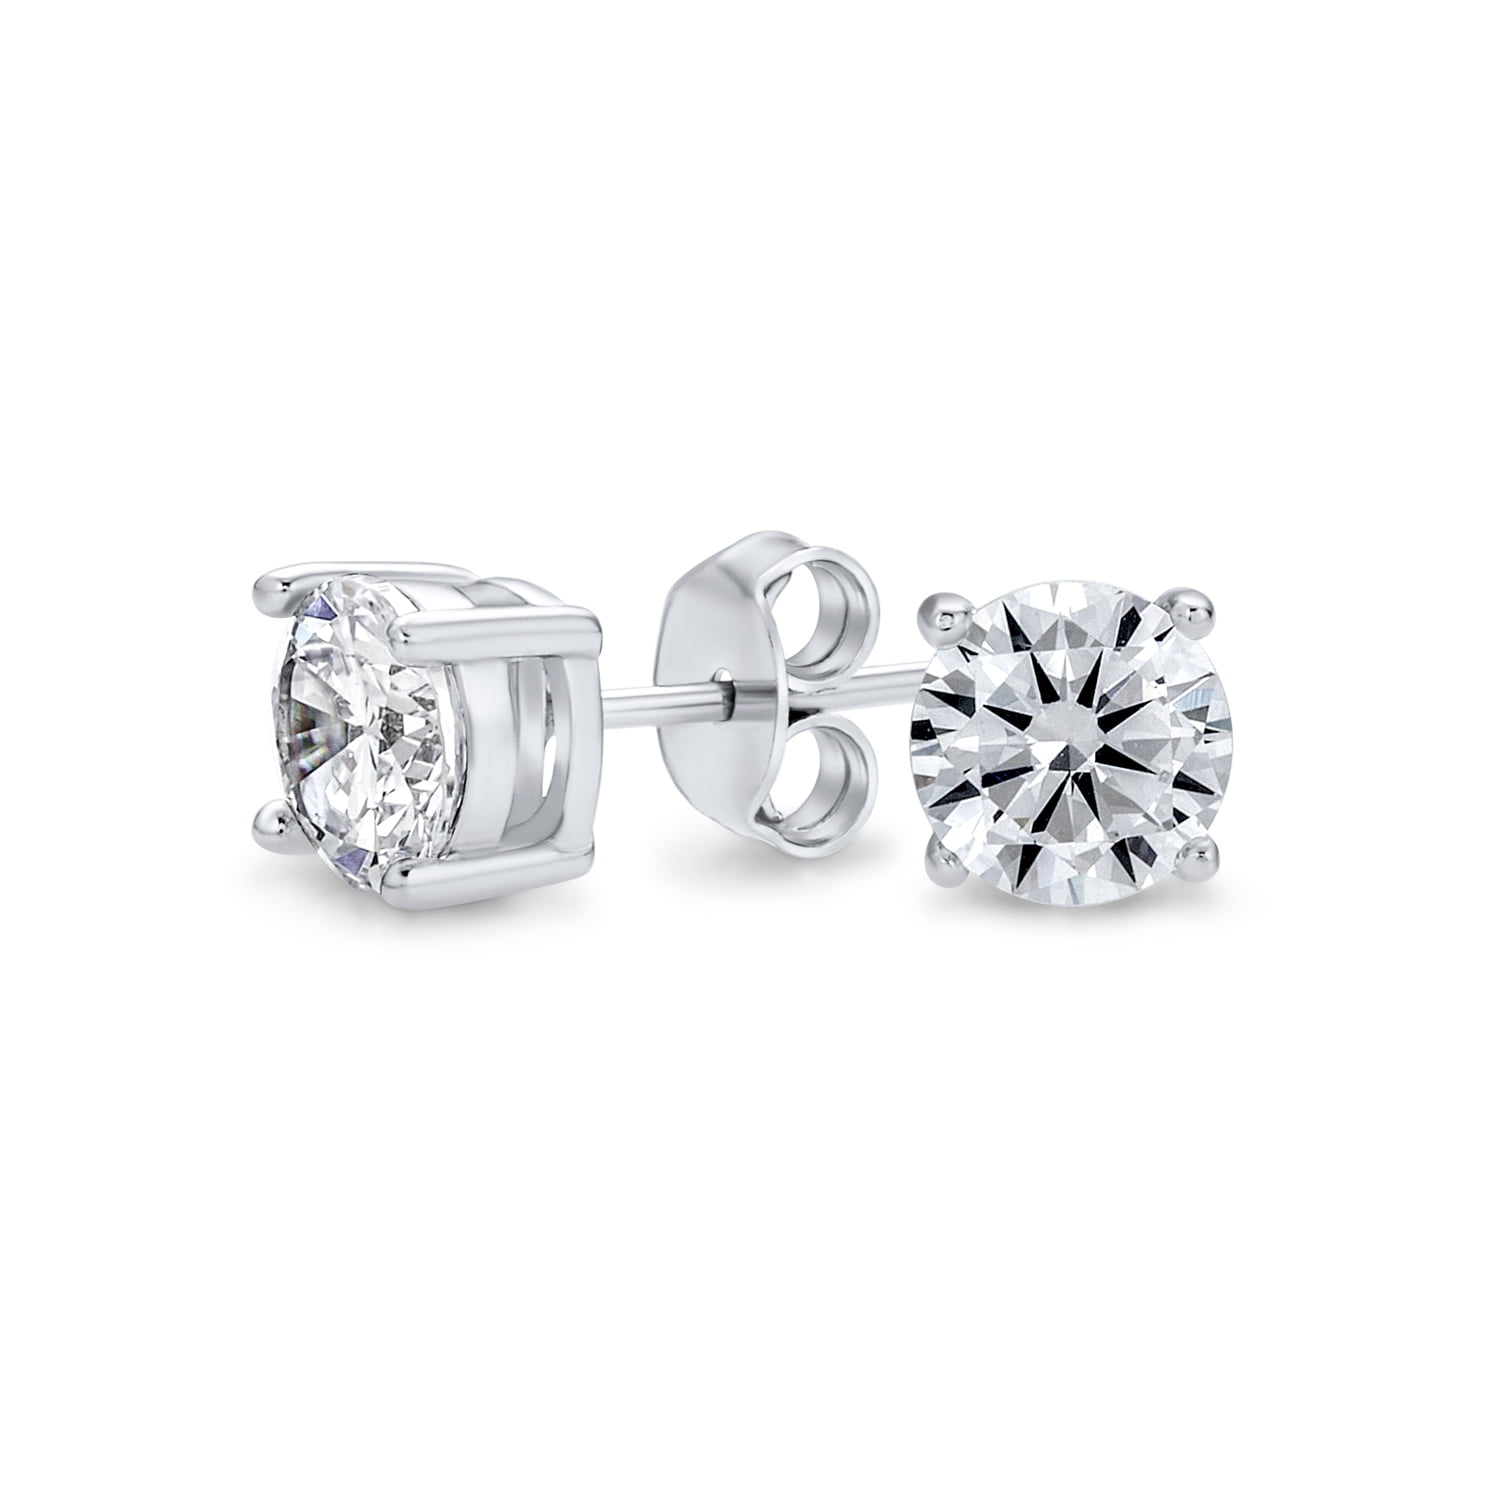 Stunning Champagne Color CZ 925 Silver Round Shape Stud Earrings 